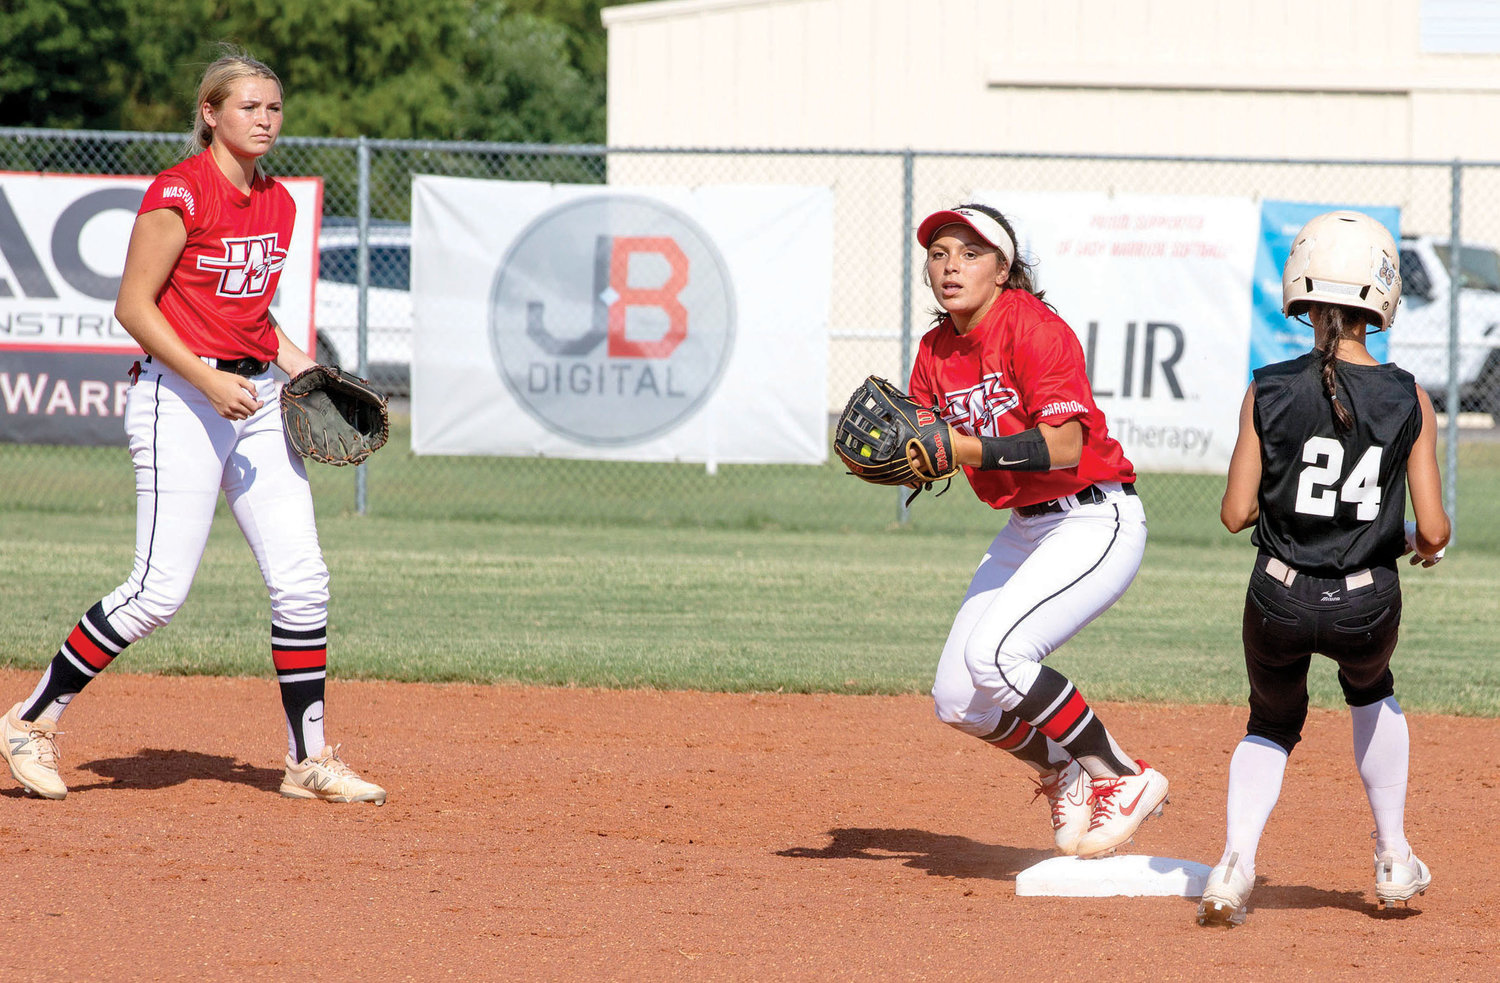 Washington senior Isa Portillo touches her base and looks to throw to first while Washington junior Skylar Wells looks on. The Warriors fell to Blanchard 6-3.